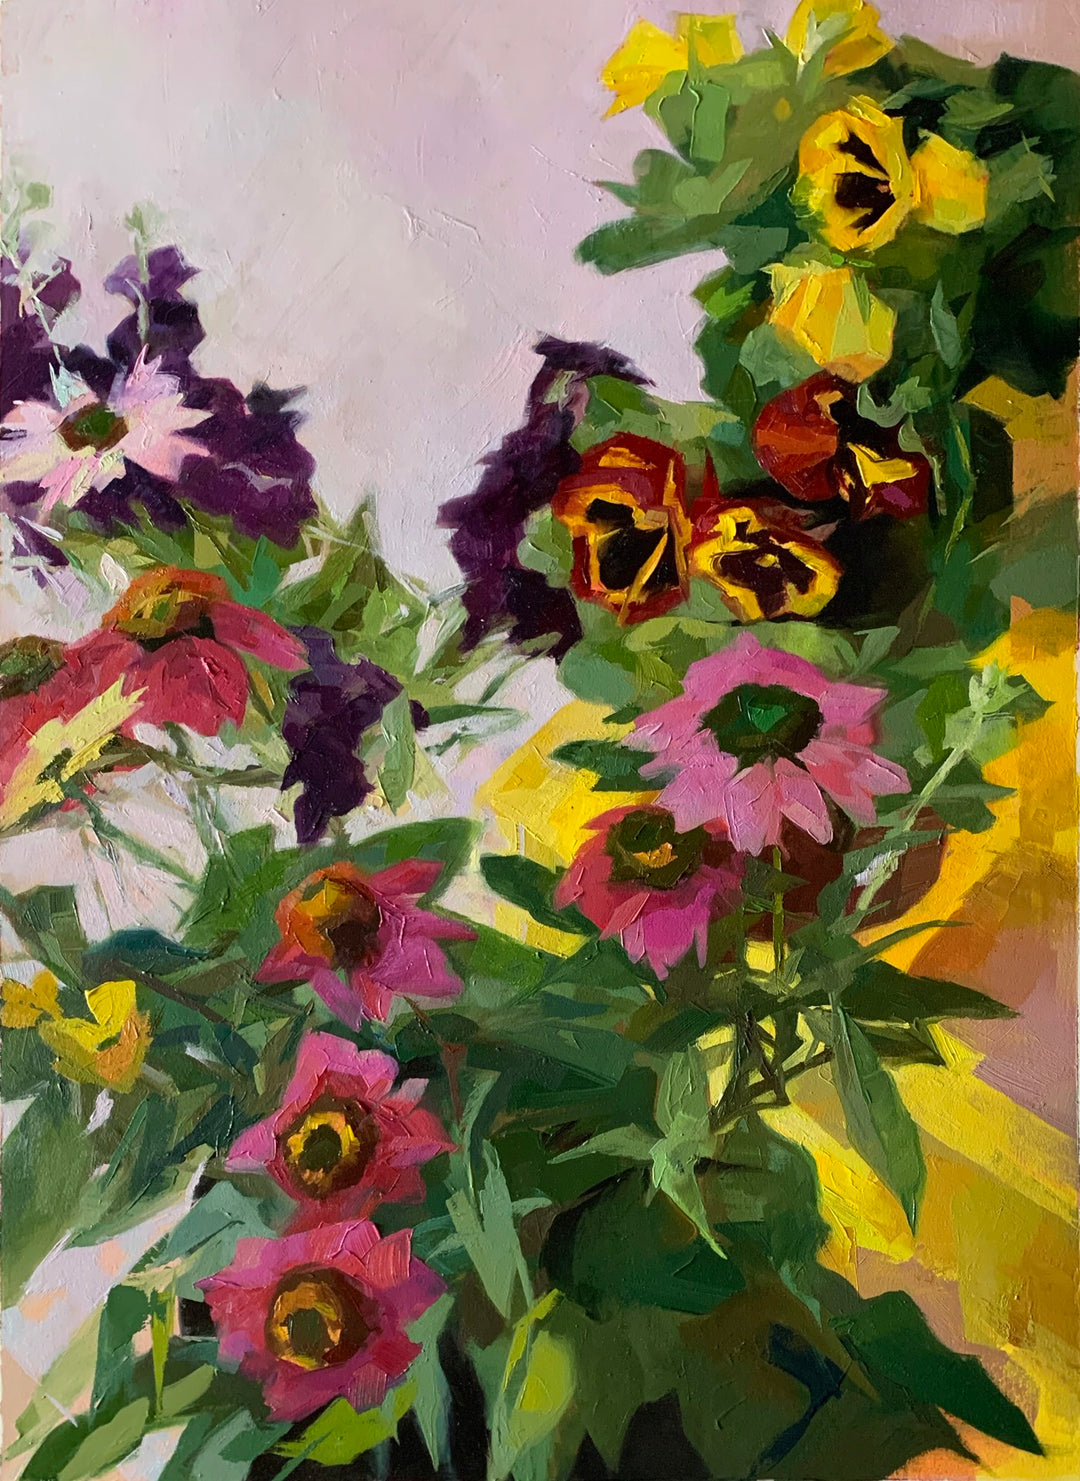 A stunning Yana Beylinson - "Yellow Box," 2019-2020 artfully captures the vivid colors of delicate flowers in an oil painting by a talented artist.